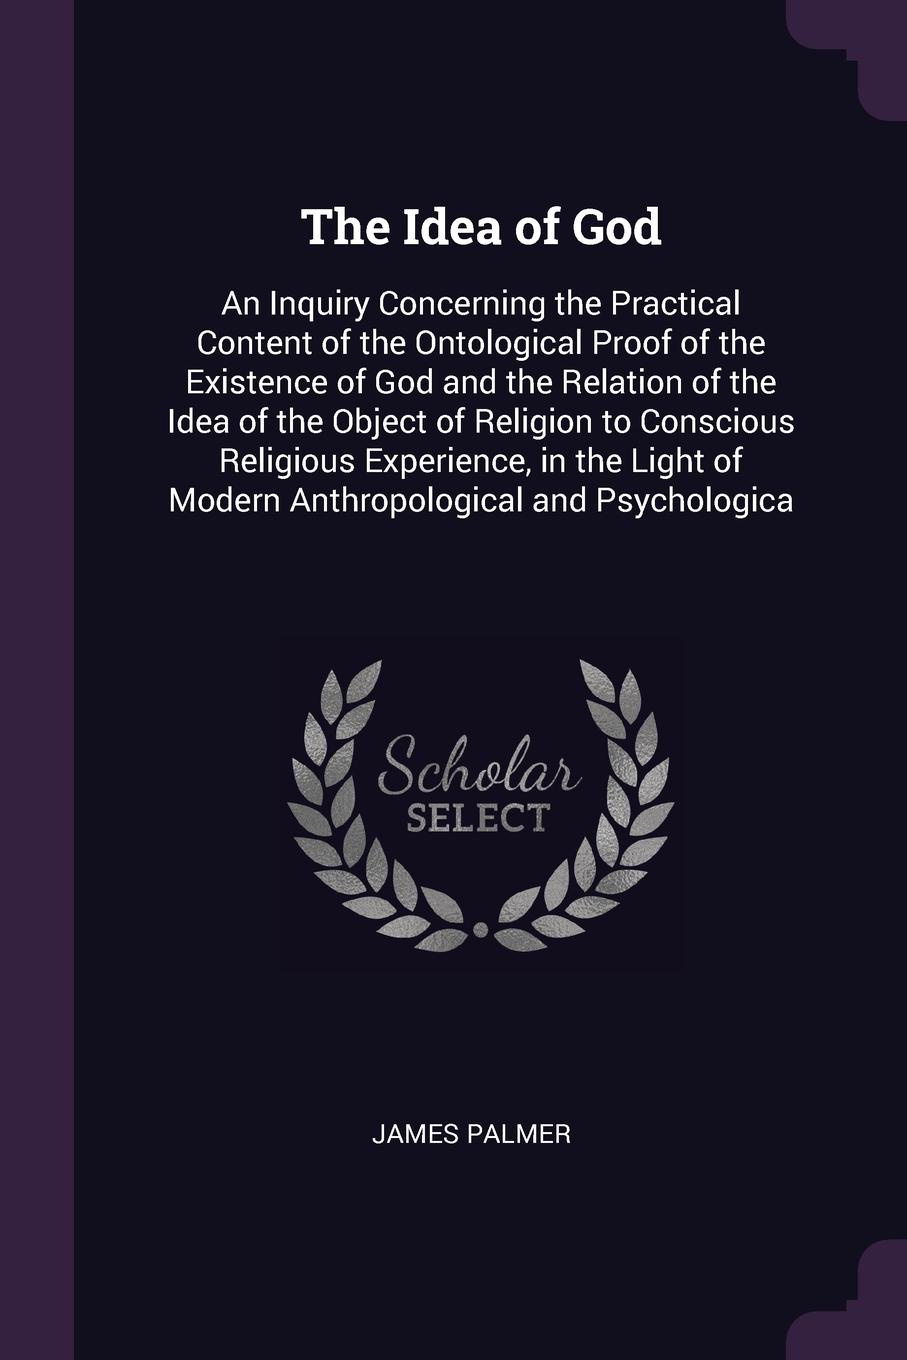 The Idea of God. An Inquiry Concerning the Practical Content of the Ontological Proof of the Existence of God and the Relation of the Idea of the Object of Religion to Conscious Religious Experience, in the Light of Modern Anthropological and Psyc...